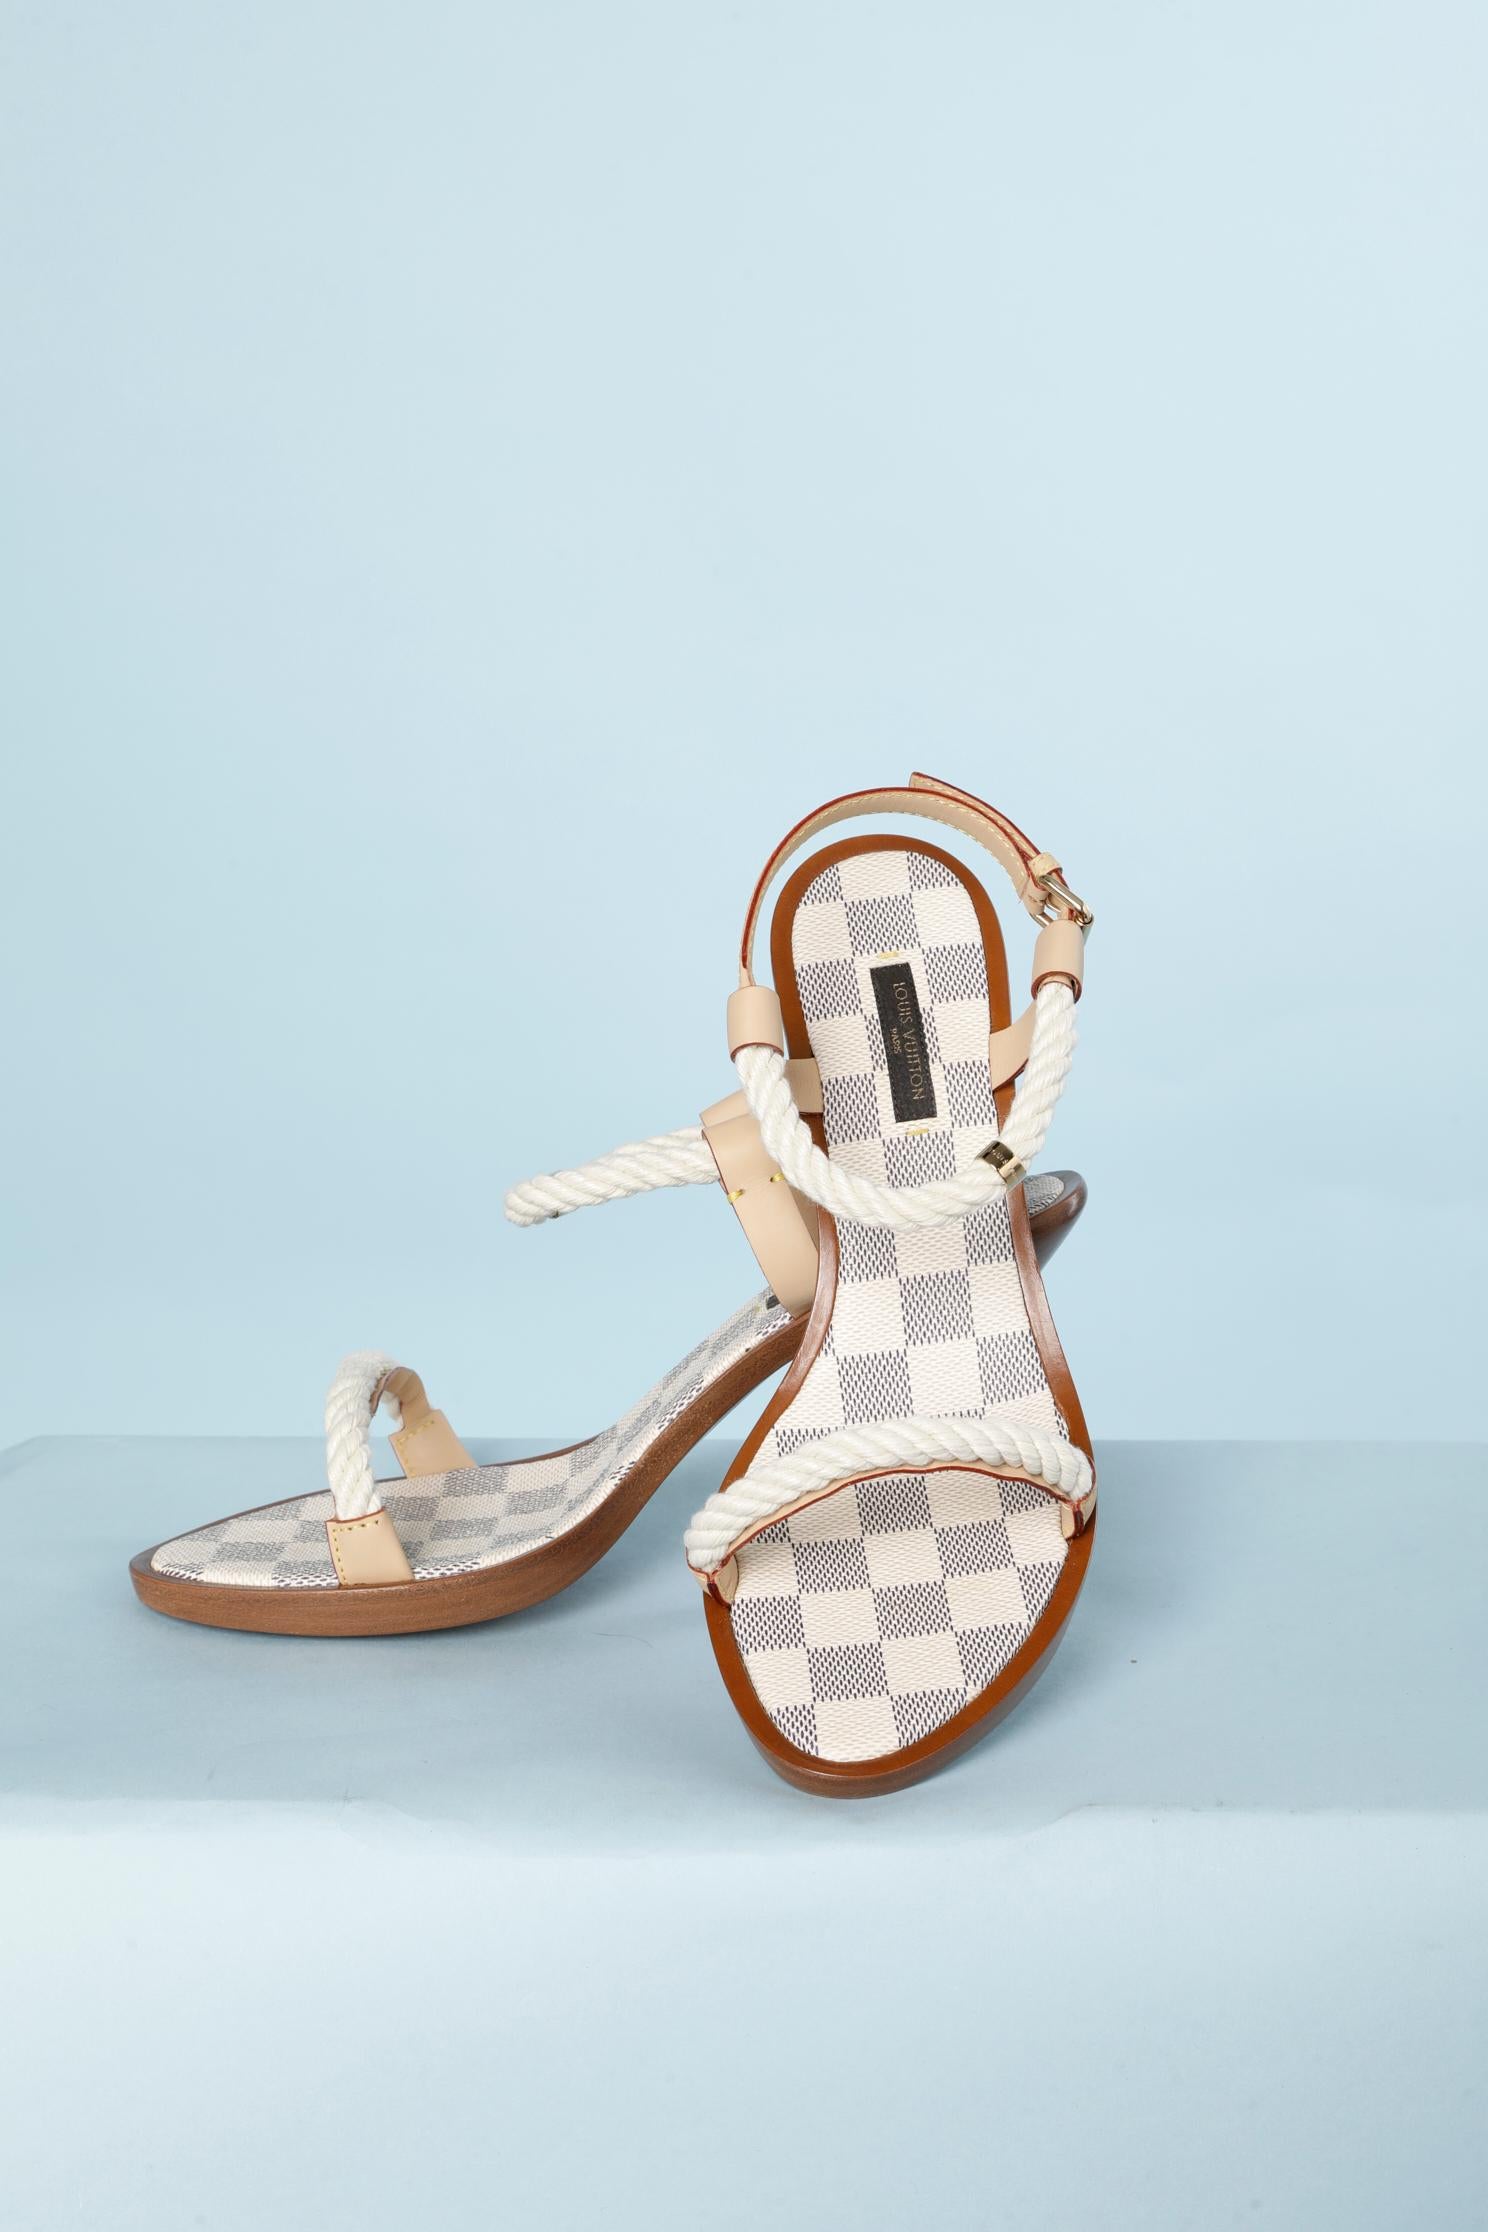 Leather and cord sandals. Heels's high = 9,5 cm
Narrow platform= 1 cm 
Branded gold metal ring ( on the cord) and monogram checkered insole 